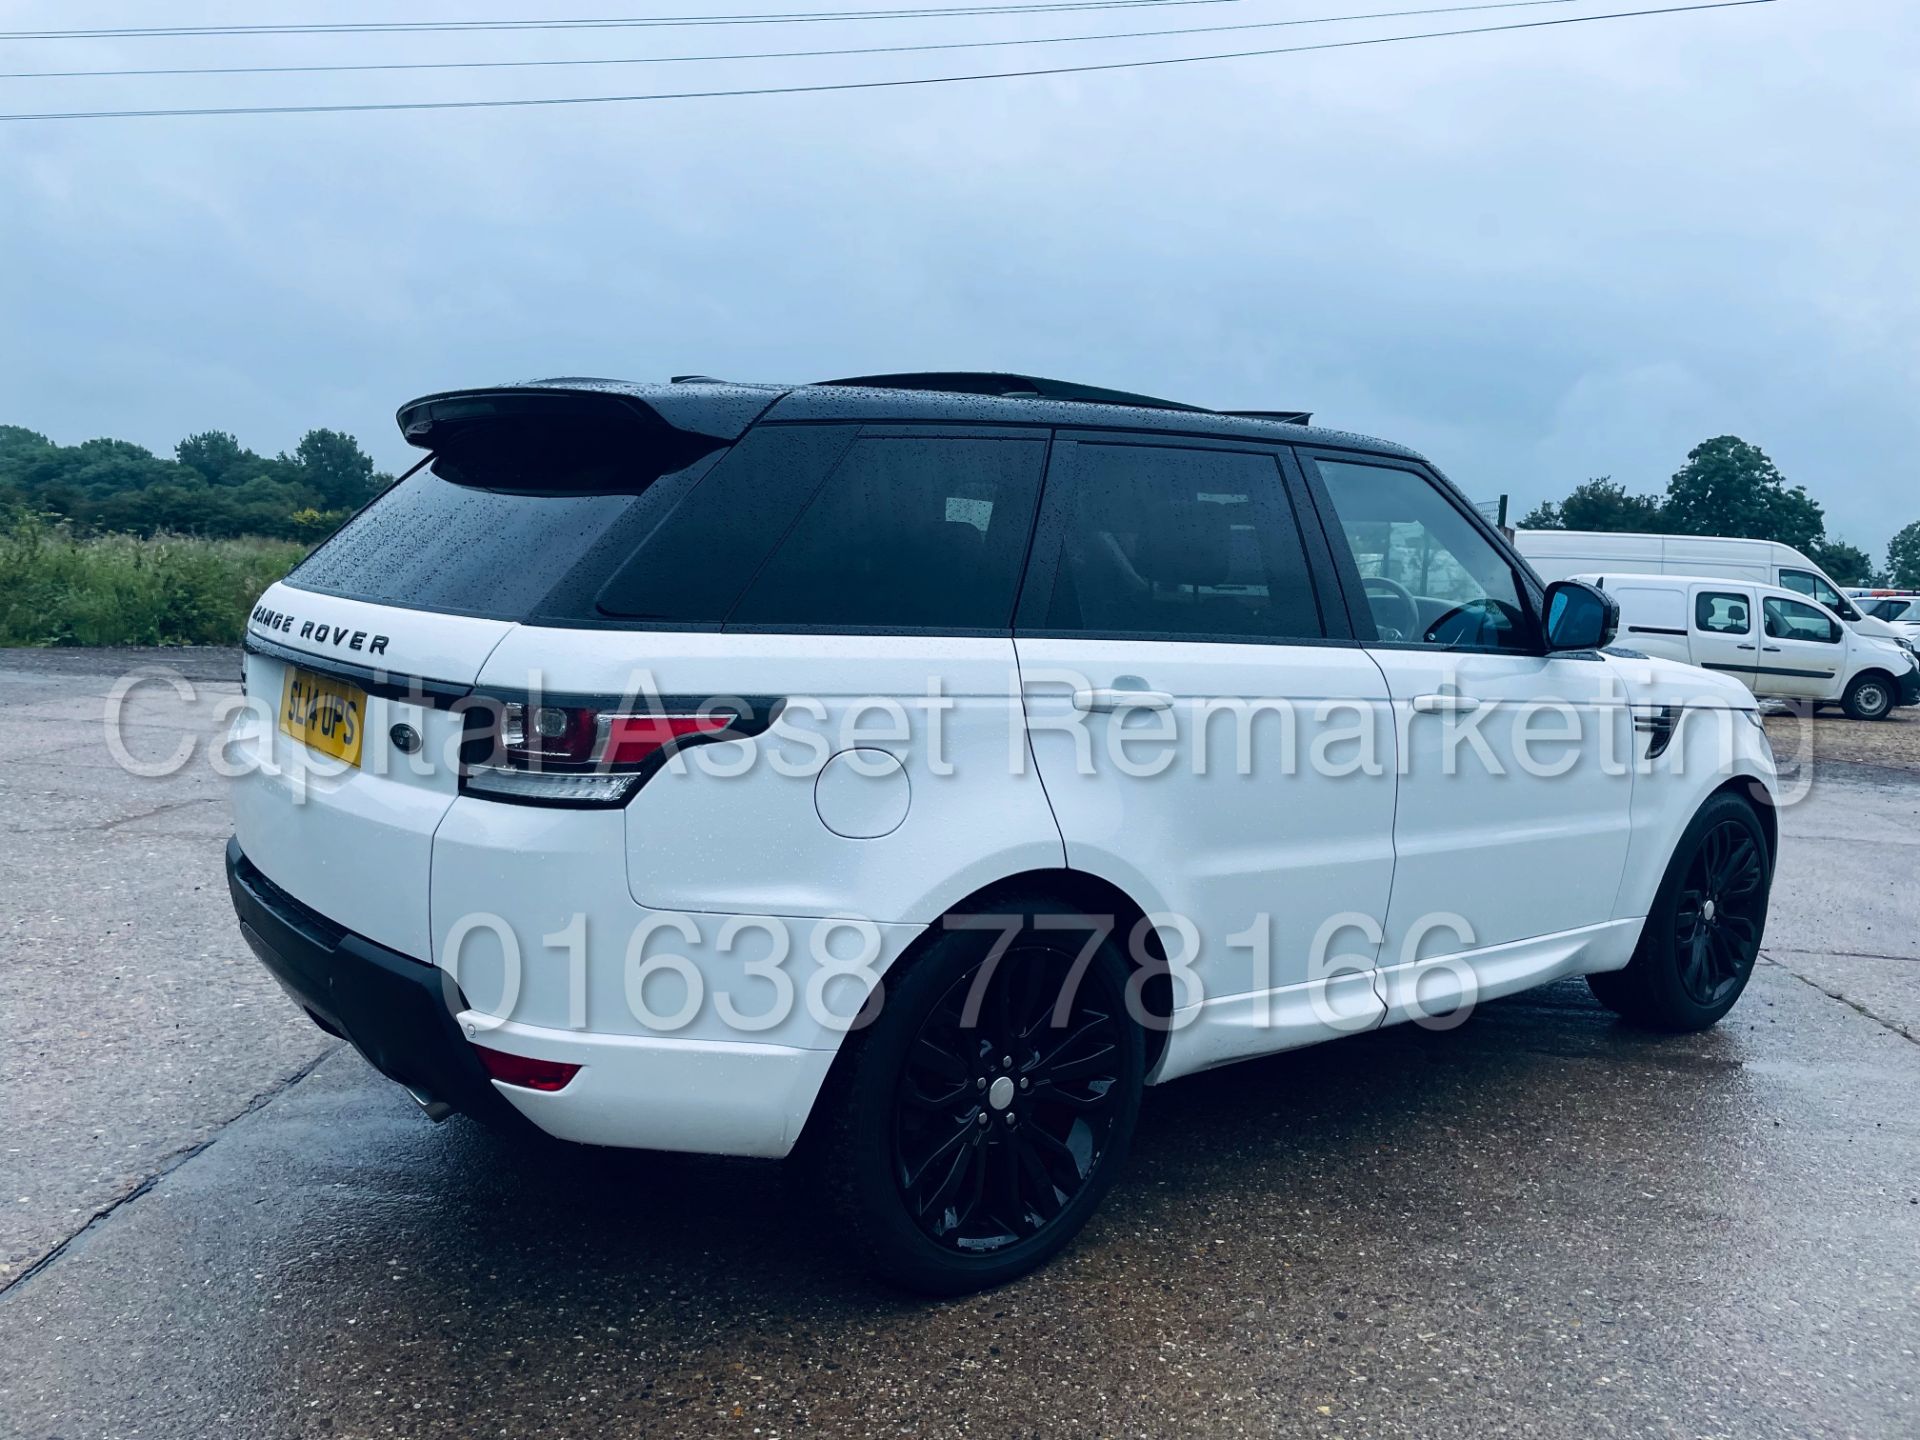 (On Sale) RANGE ROVER SPORT *SPECIAL EDITION* (2014 - FACELIFT) '3.0 TDV6 - AUTO' *NAV & PAN ROOF* - Image 13 of 54